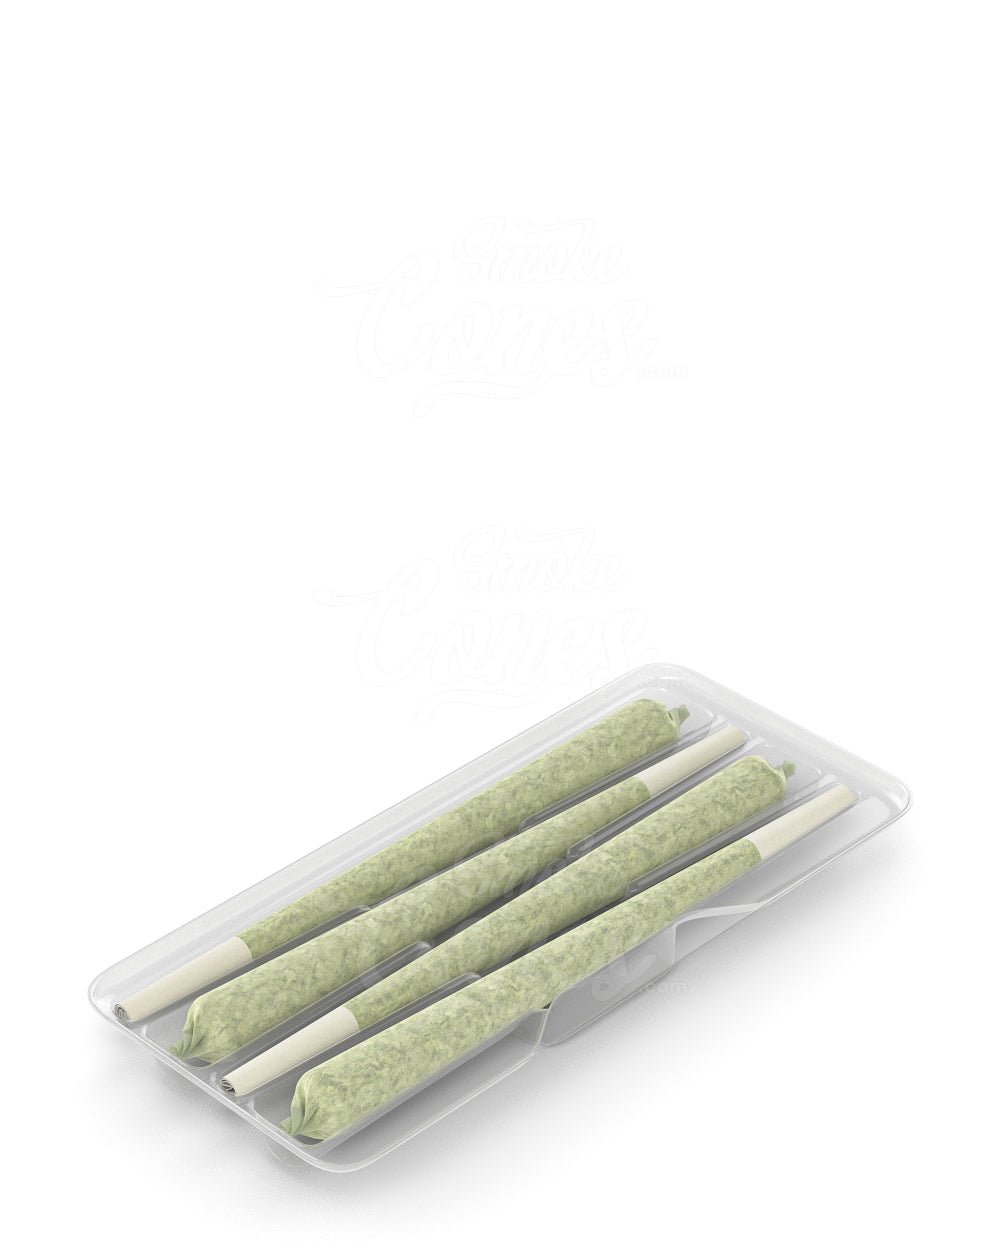 Pre-Roll Containers: Wholesale Joint Boxes For Pre-Rolls